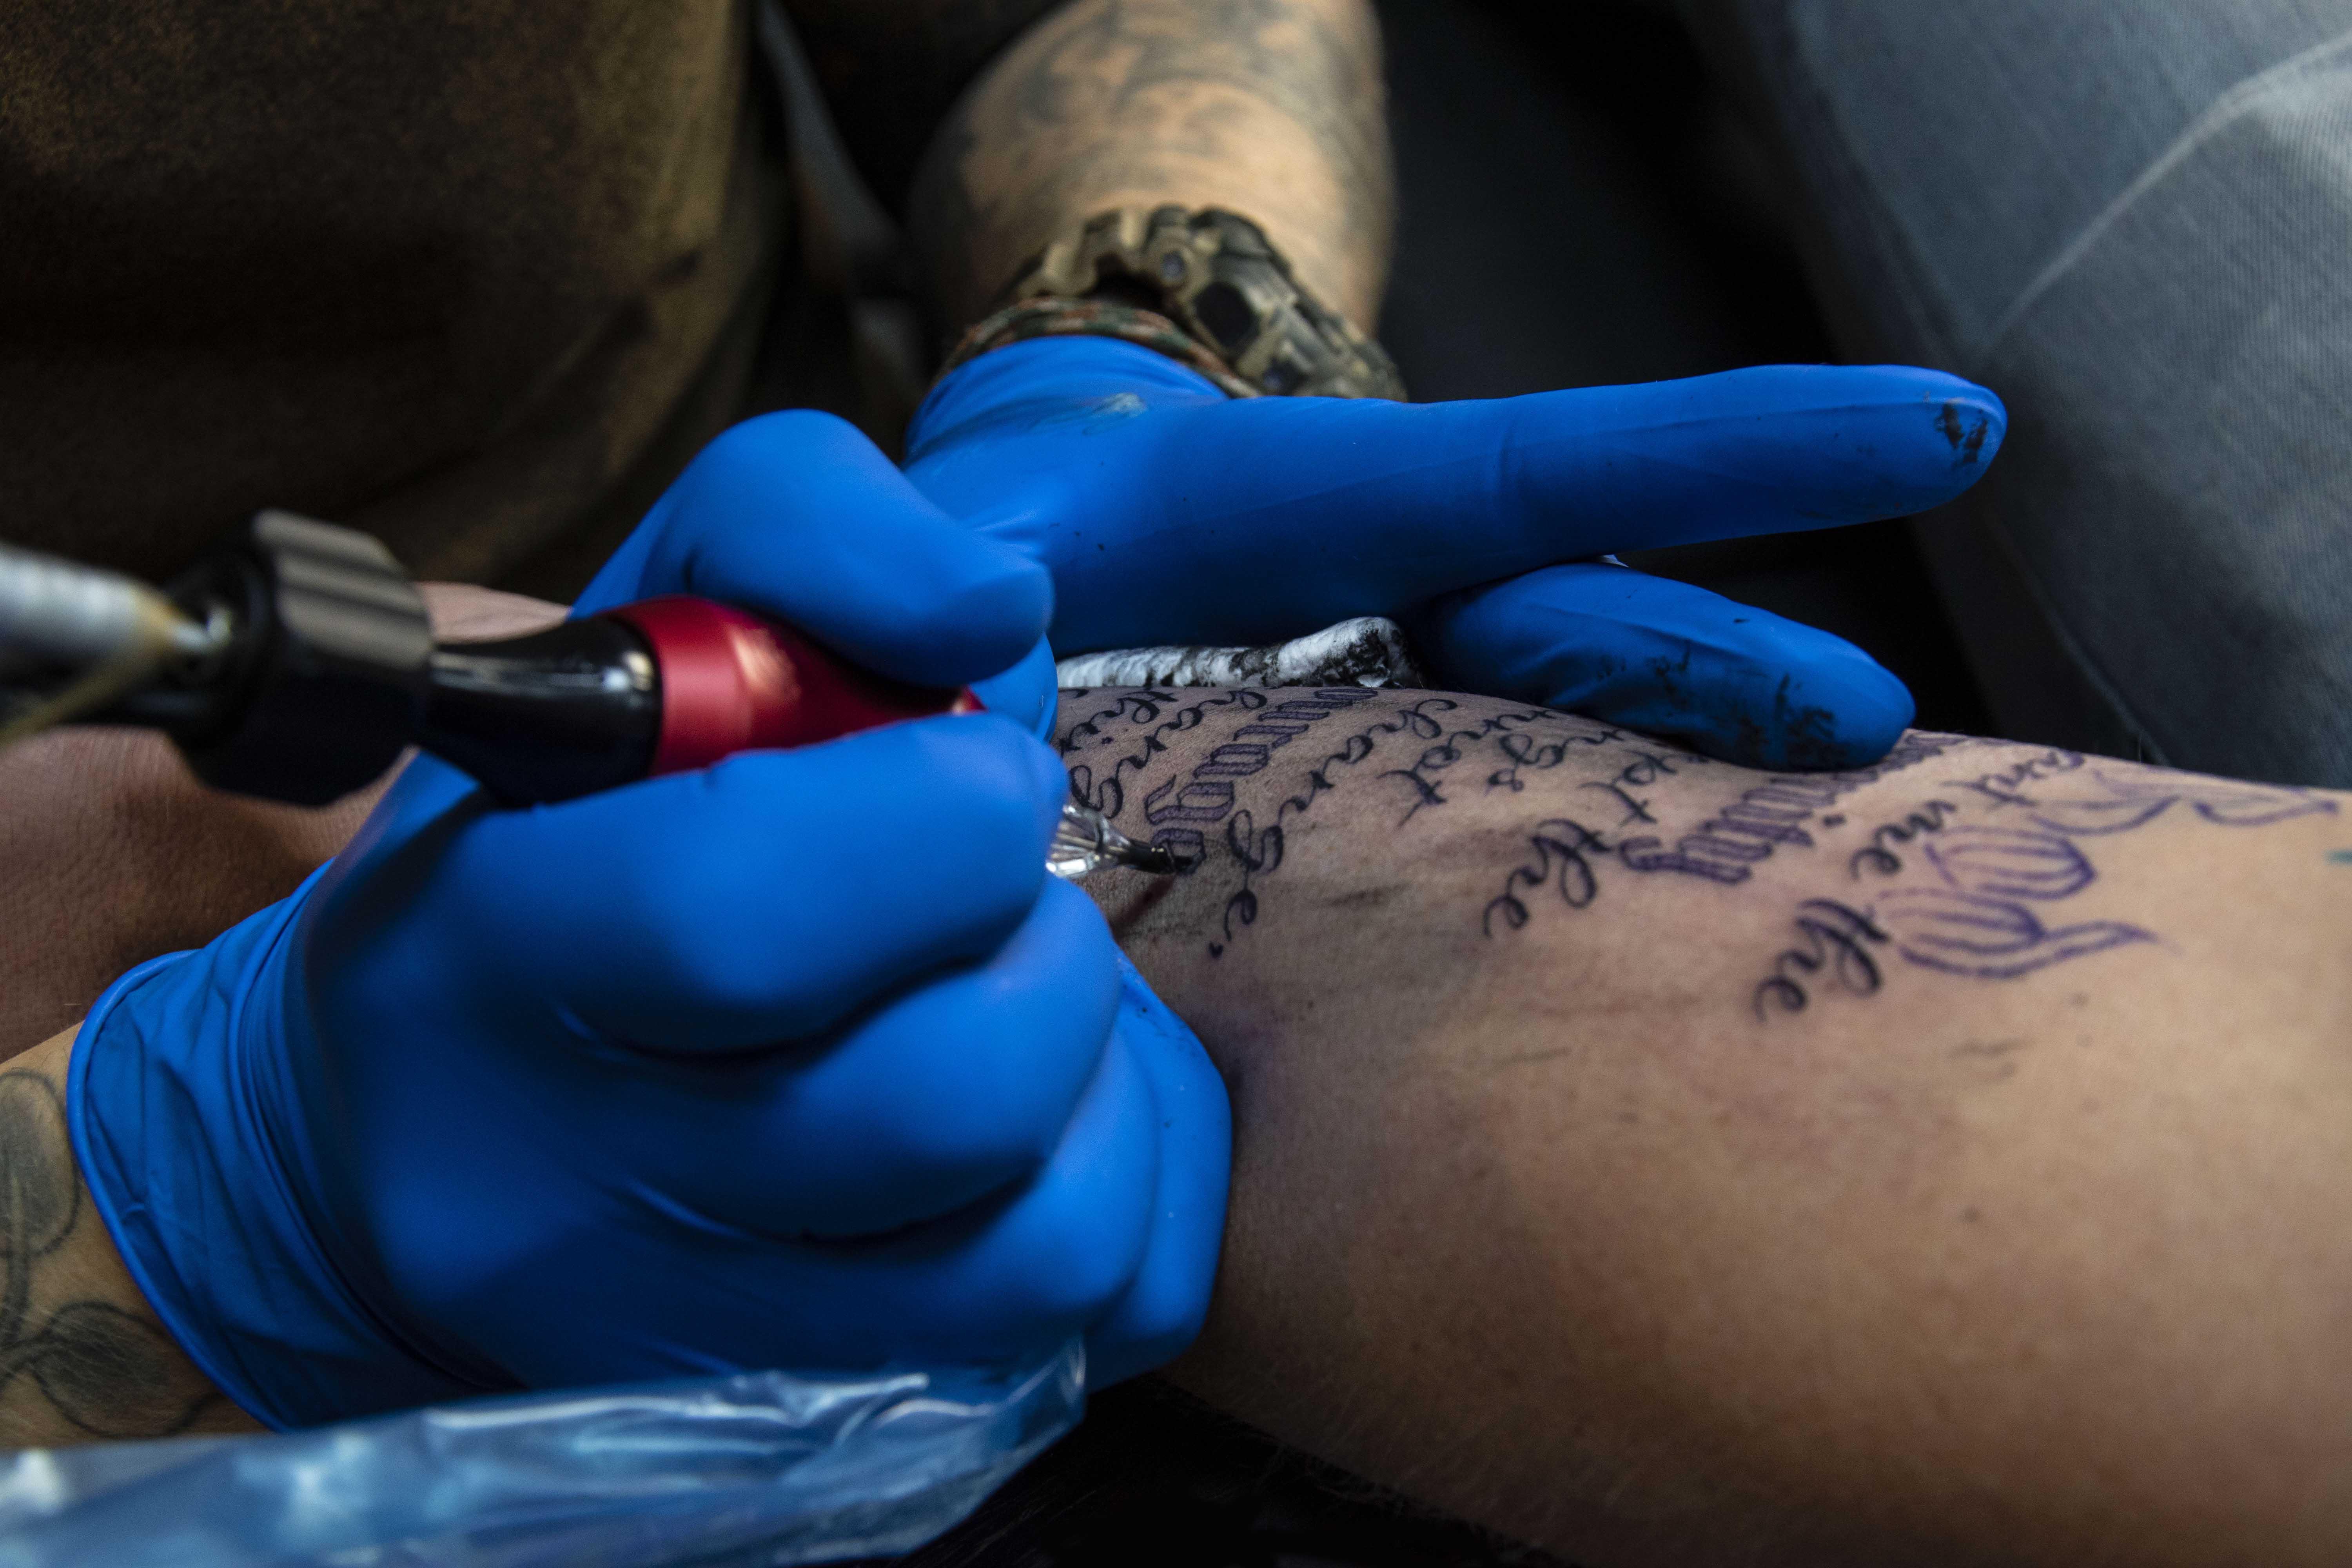 Can Tattoos Cause Cancer? The Health Risks of Inking